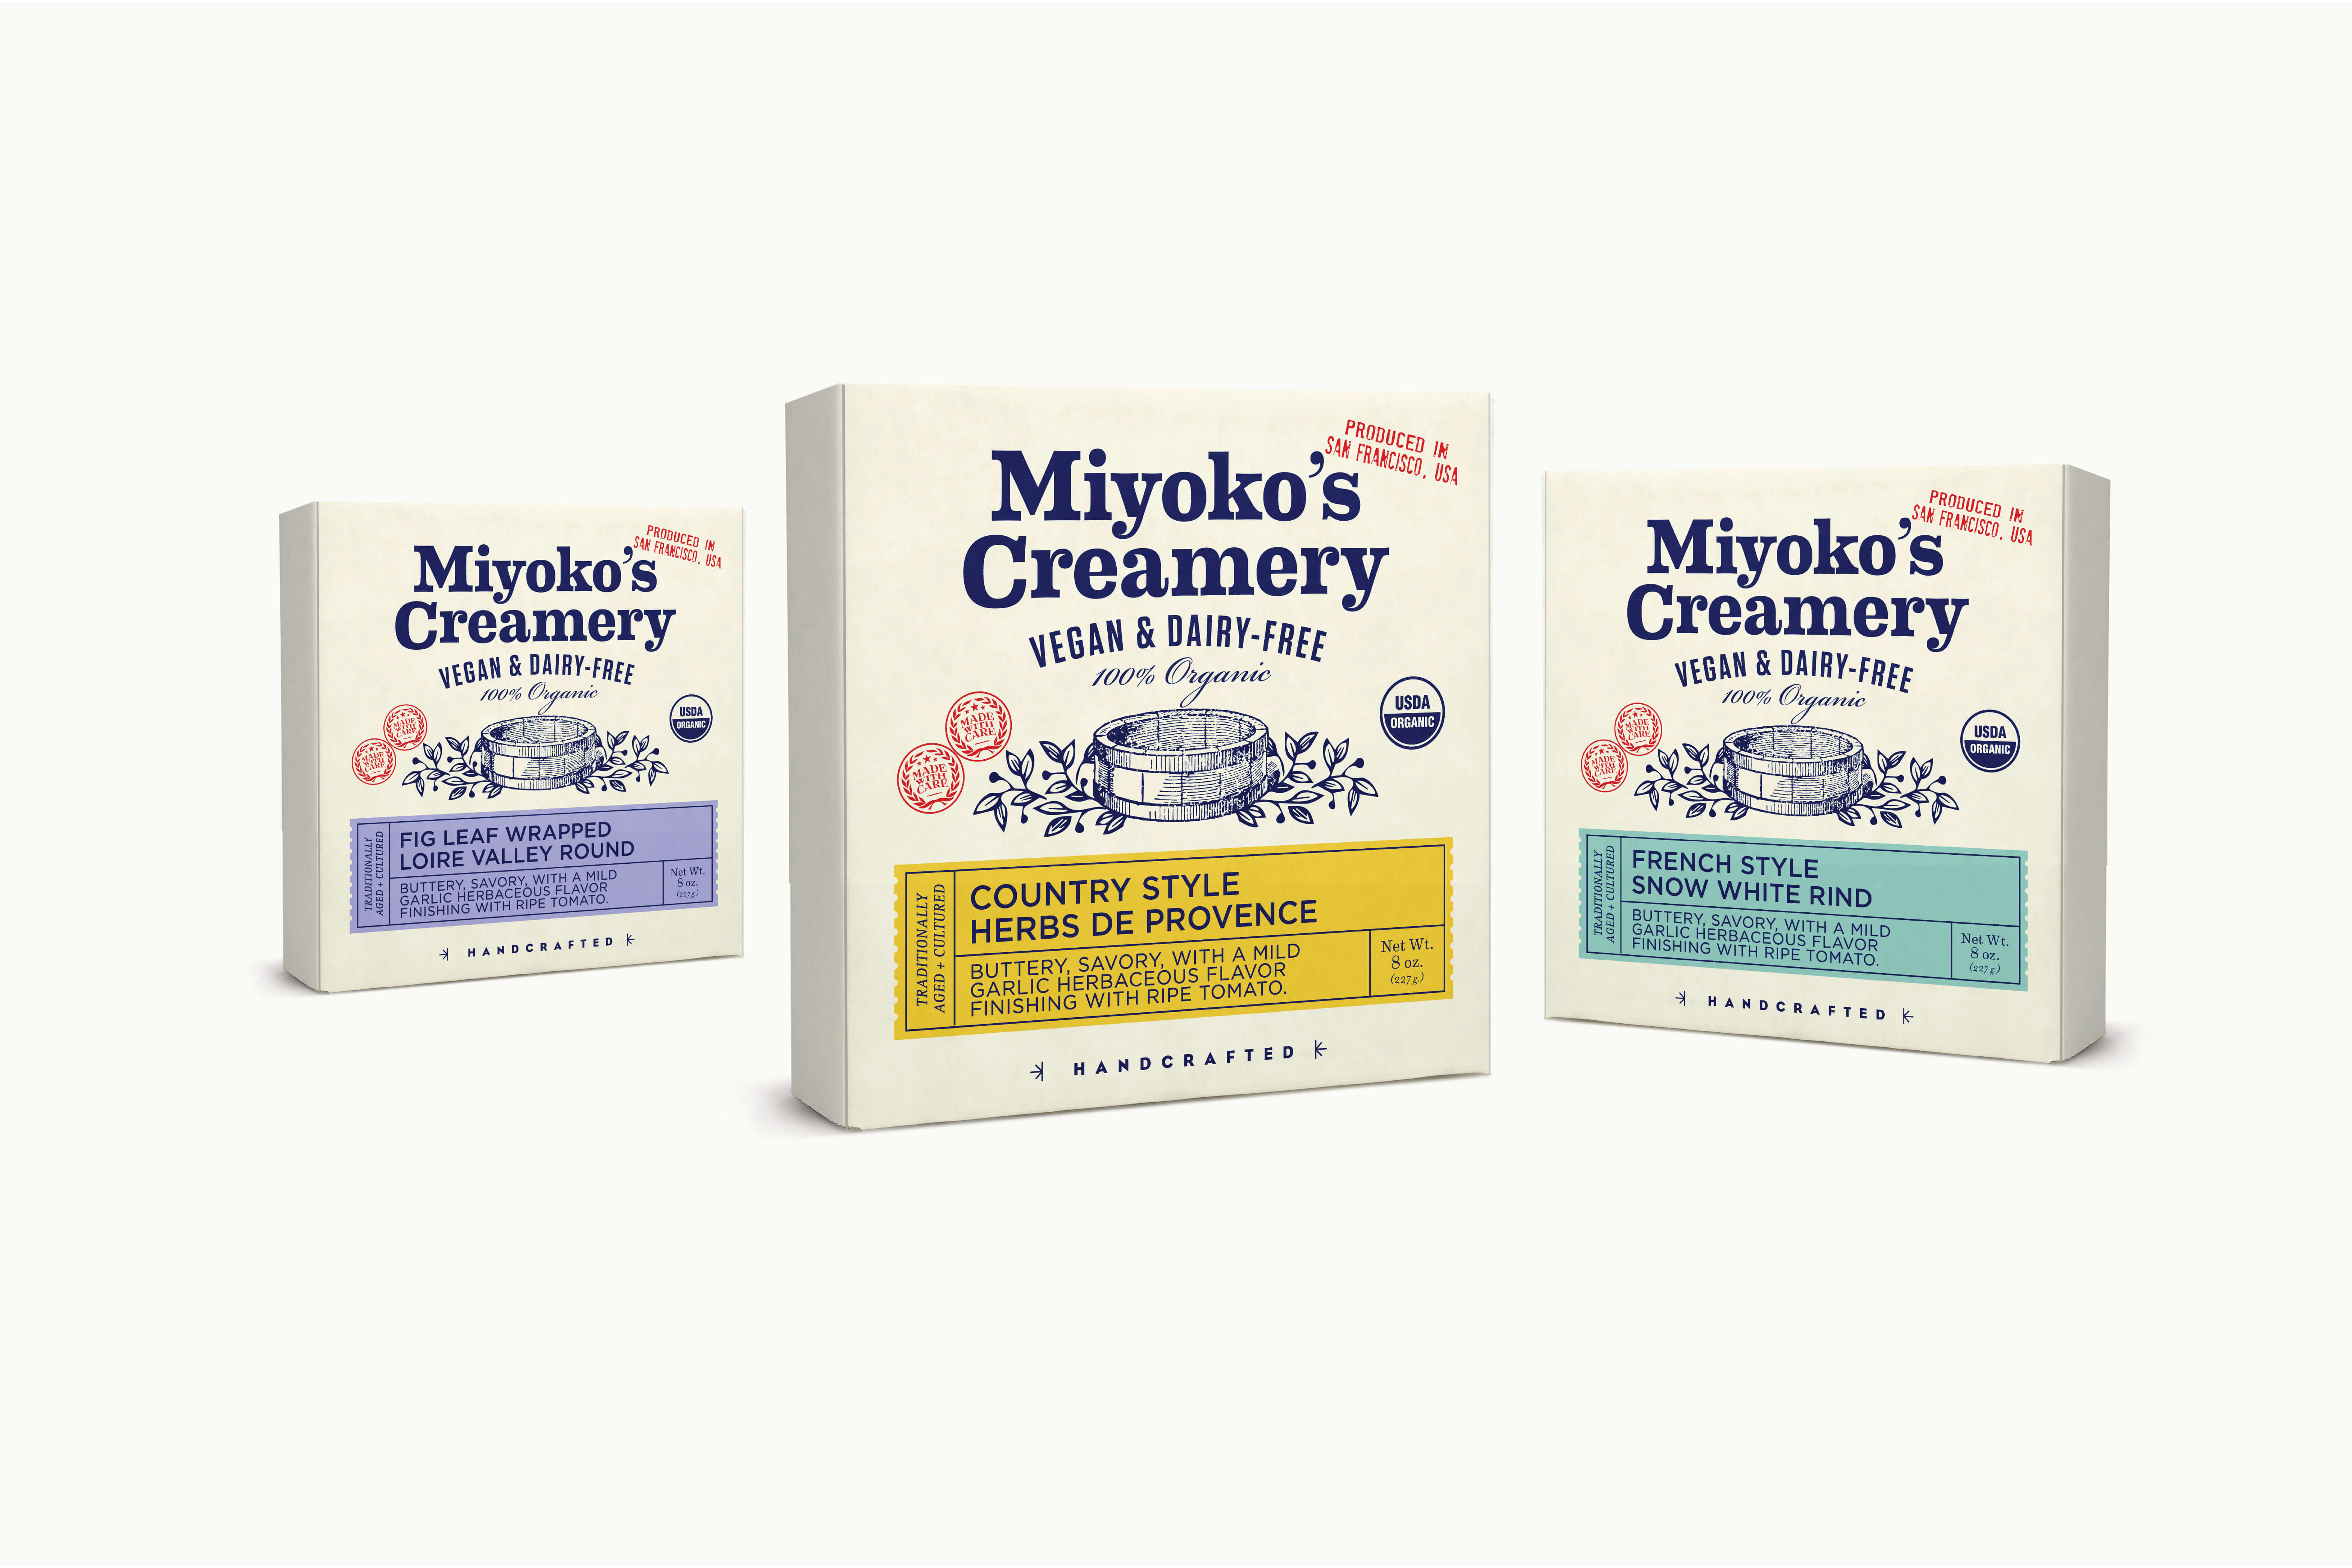 Runner up packaging design concept featuring an engraved vintage cheese press.